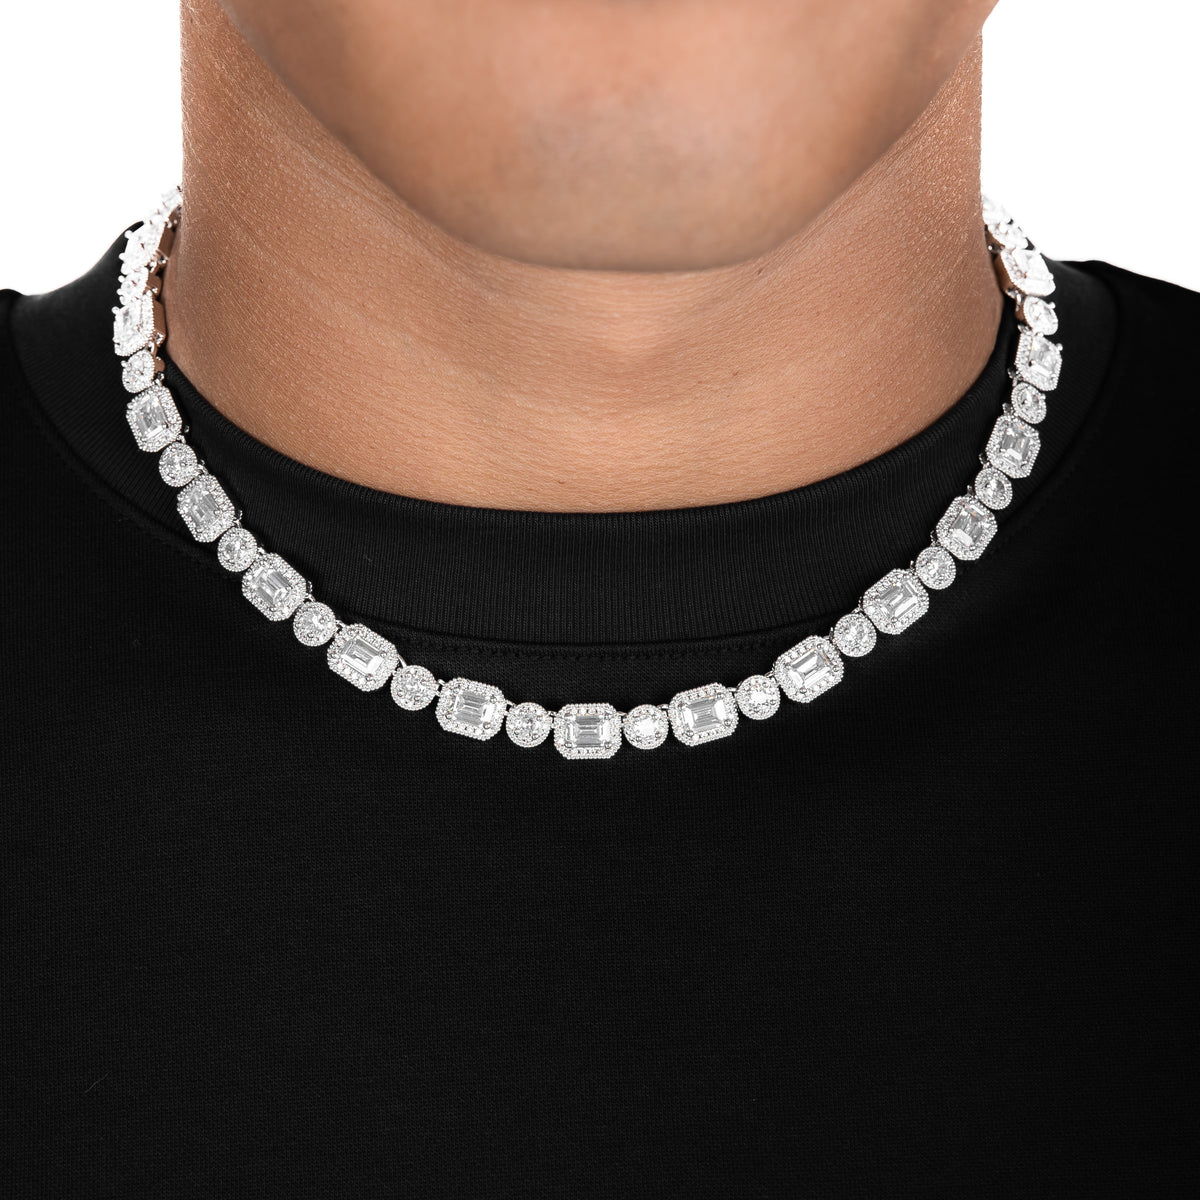 Clustered Crystal and Bead Tennis Necklace - NCF5BGSRC - Sorrelli